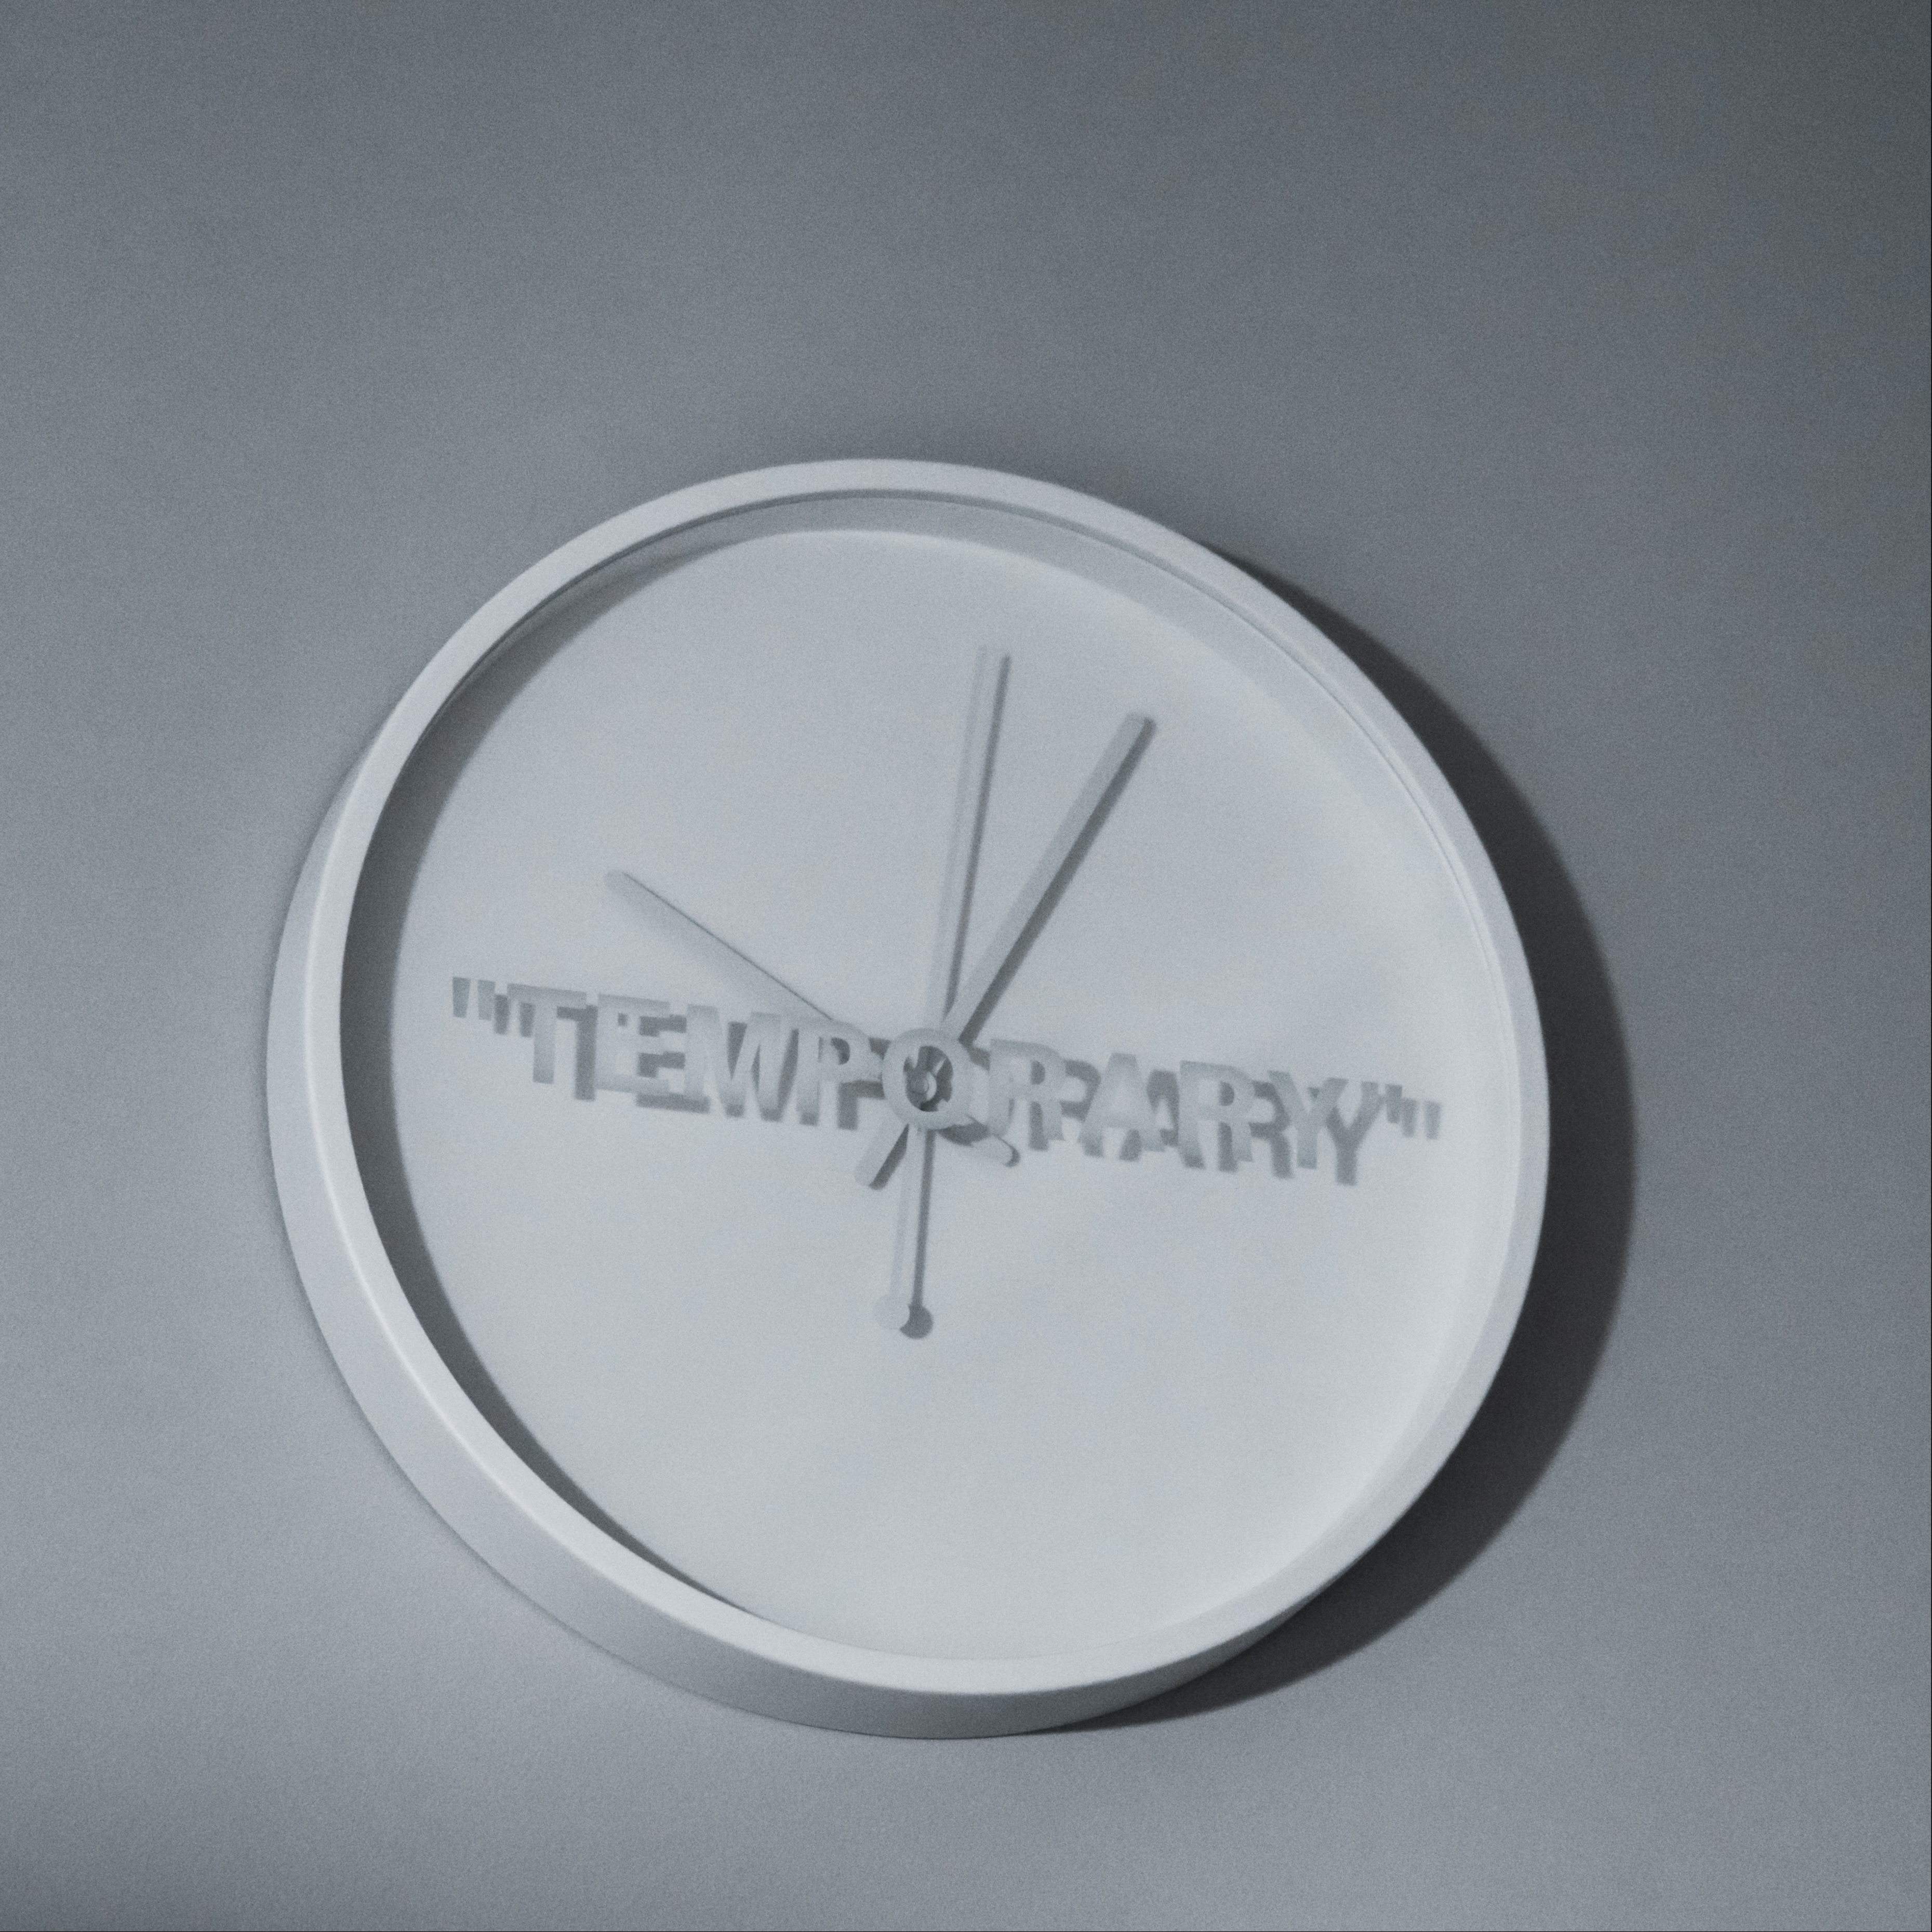 District 4 - VACANT - PICTURE OF WHITE CLOCK THAT SAYS TEMPORARY